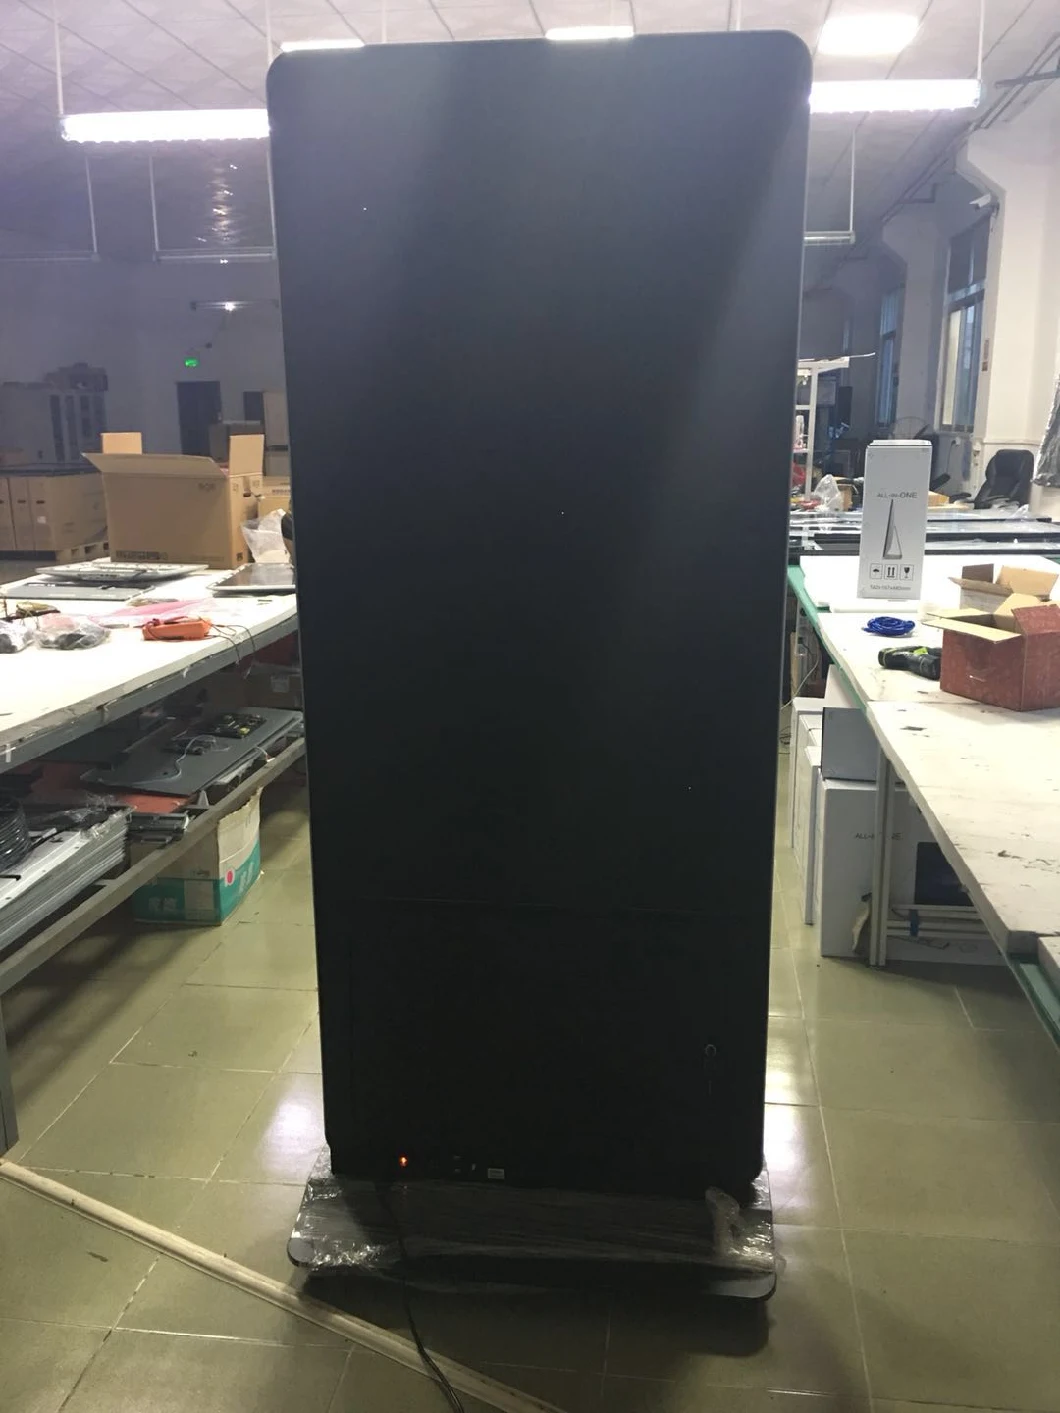 55-Inch LCD Advertising Player Floor Standing with Right Angle, Digital Signage Display